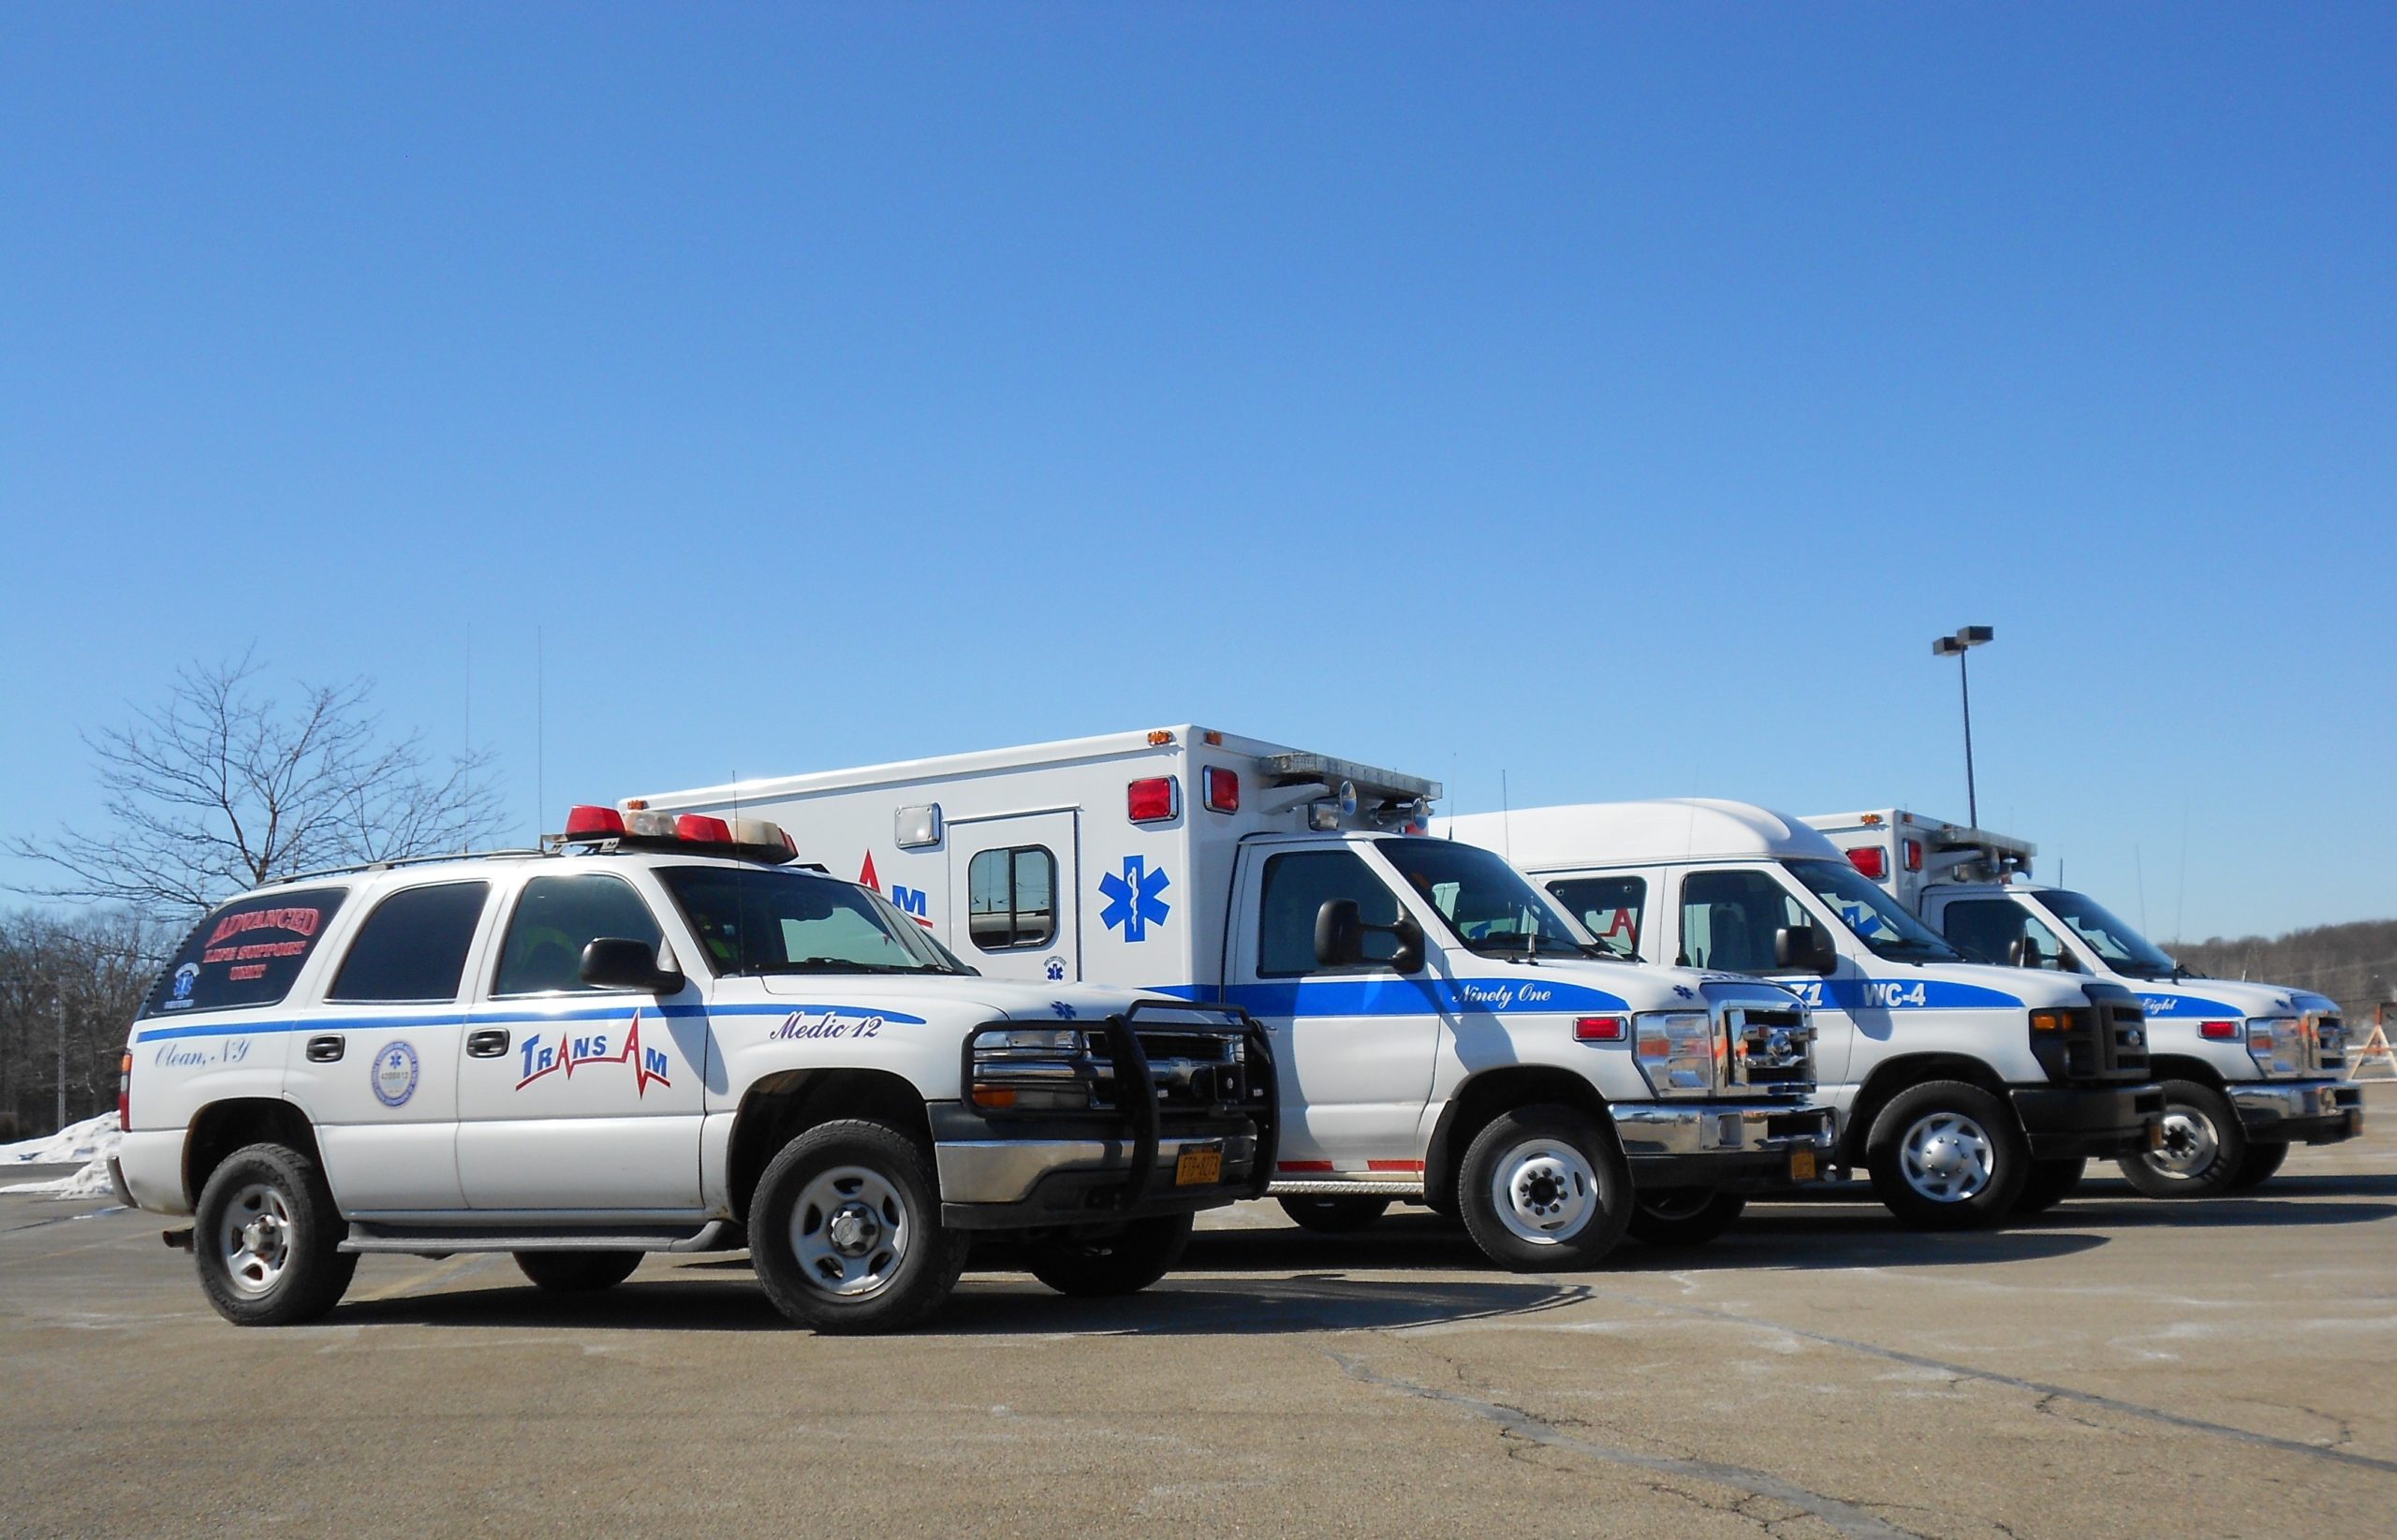 Featured image for “PRIORITY AMBULANCE TO PURCHASE TRANS AM AMBULANCE SERVICES, INC. IN NEW YORK”